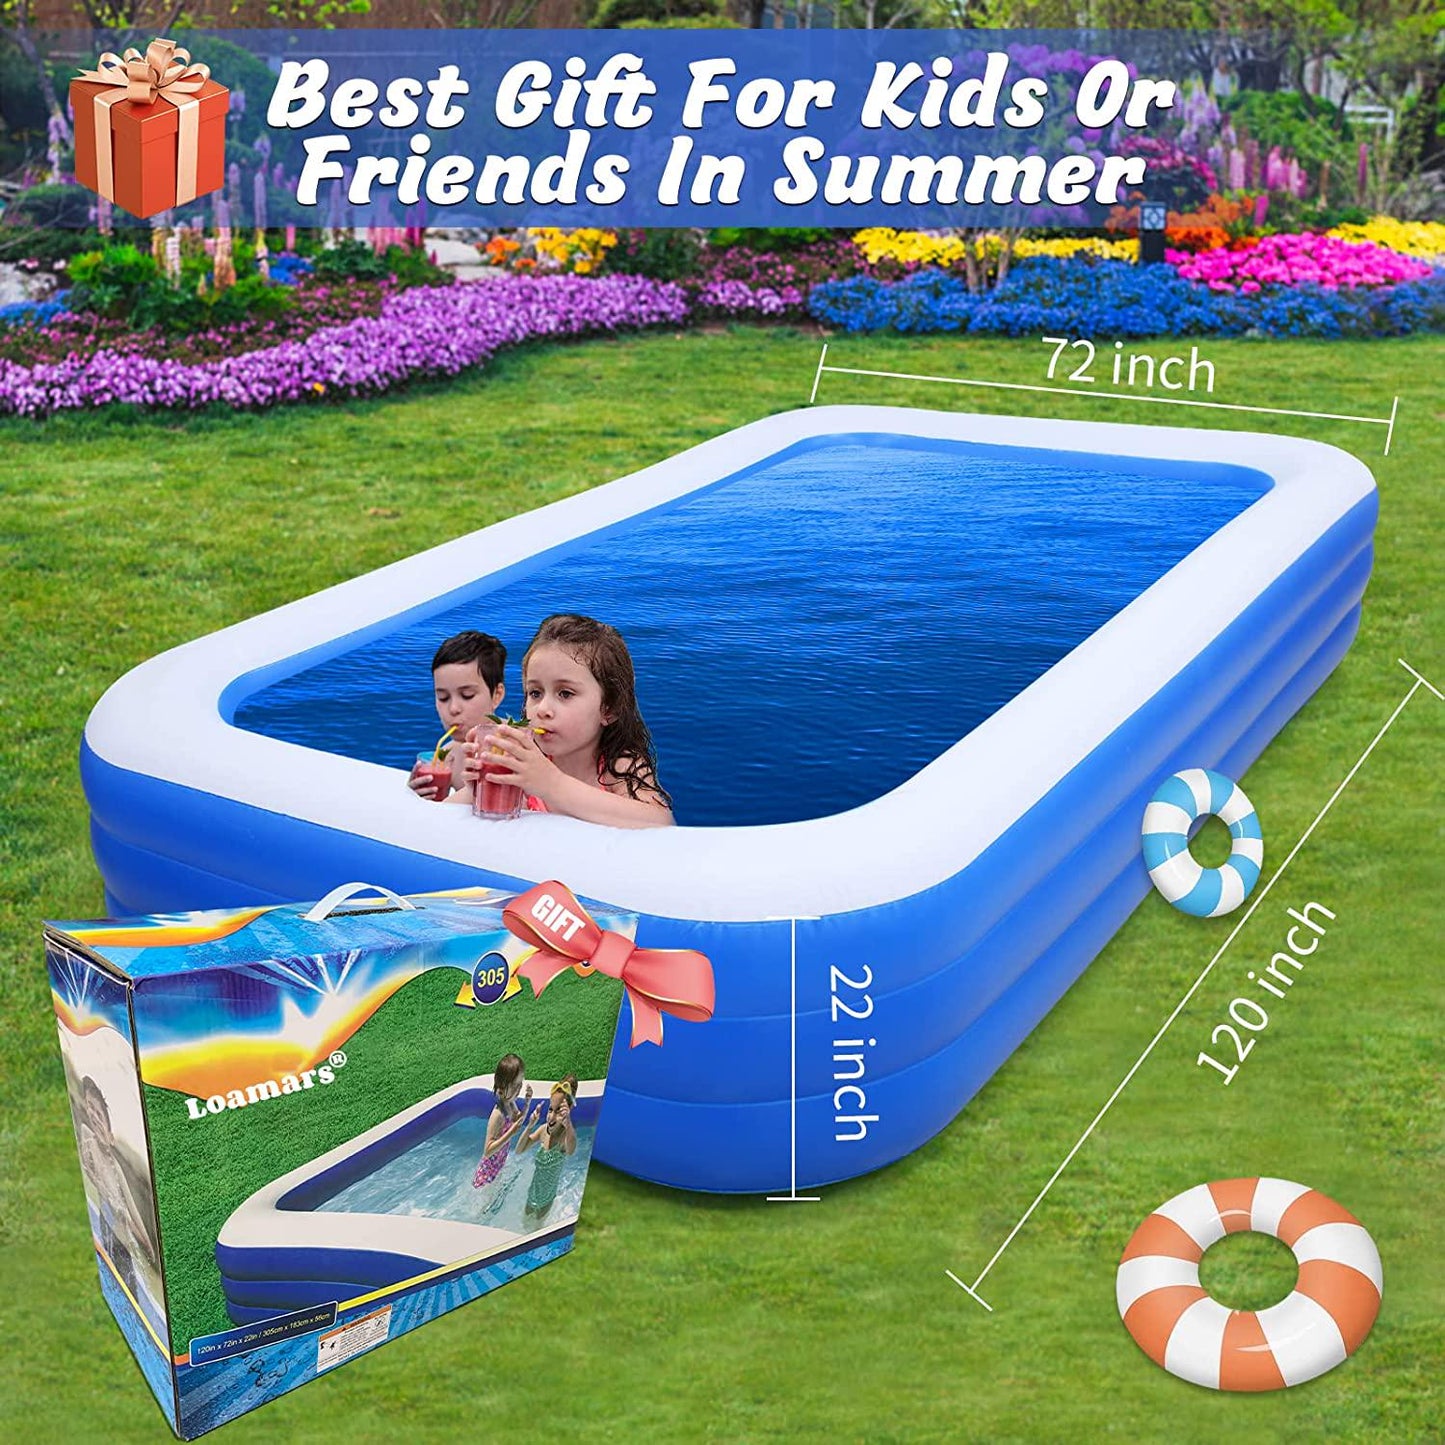 Loamars Inflatable Pool for Adults, 120 * 72 * 22 Inch Inflatable Swimming Pool for Kids, Full-Sized Thickened Family Blow Up Pool, Extra Large Kids Pools